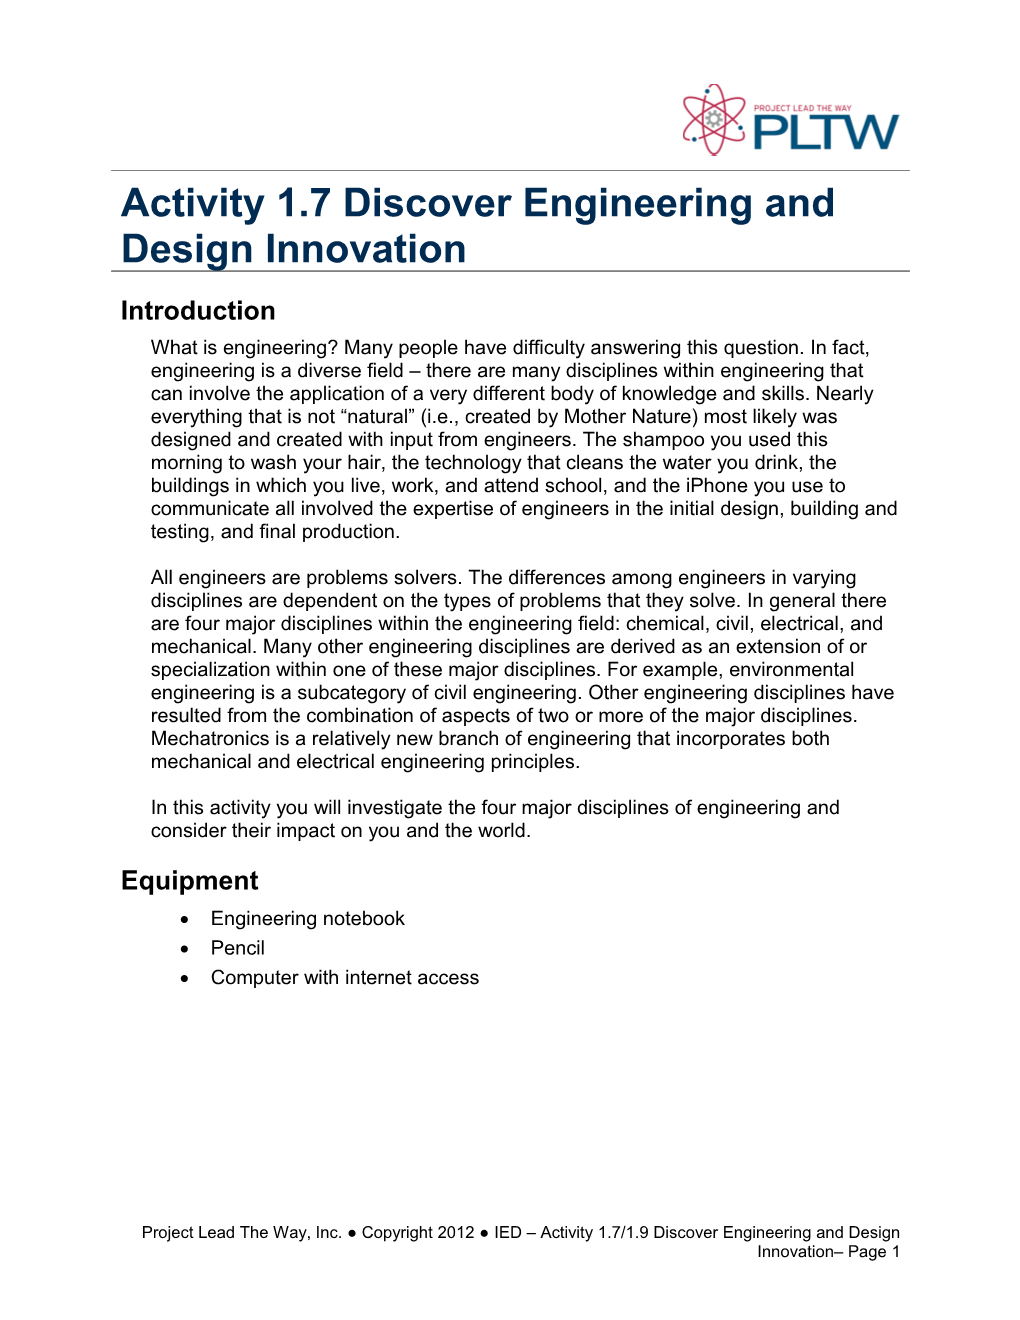 Activity 1.7 Discover Engineering